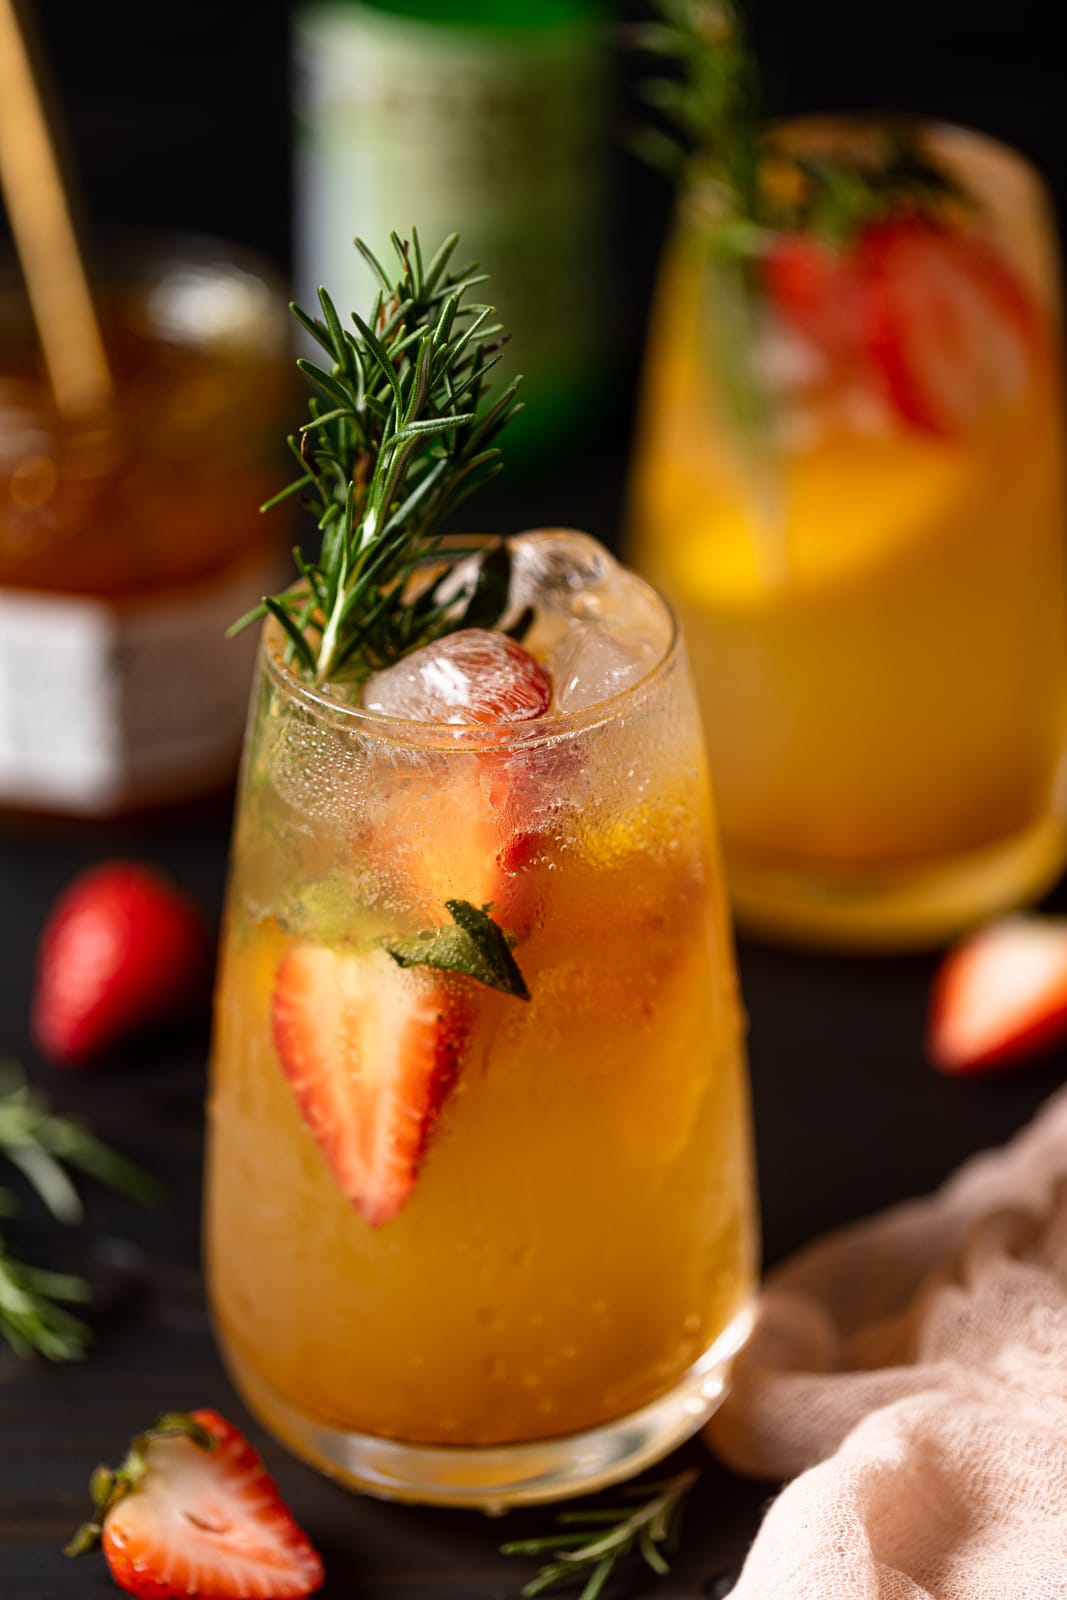 Peachy Ginger Beer Mocktail with halved strawberries, rosemary sprigs, and ice